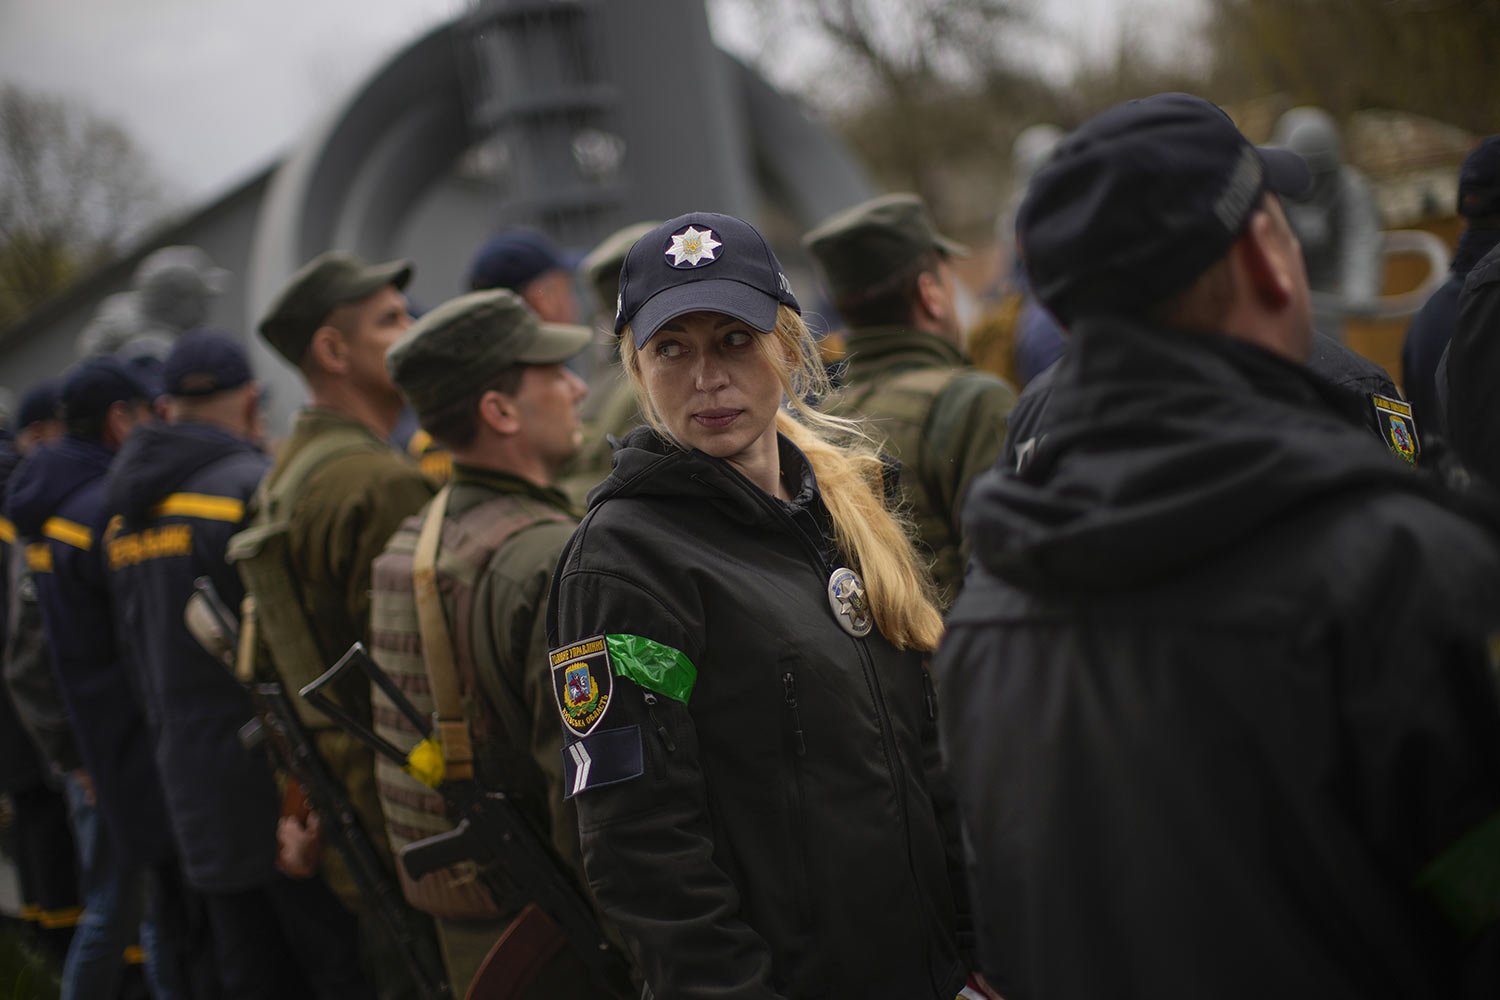  Decorated State Emergency Service unit member Anna Pinchuk attends a ceremony commemorating the Chernobyl nuclear power plant disaster at the Those Who Saved the World monument in Chernobyl, Ukraine, Tuesday, April 26, 2022. (AP Photo/Francisco Seco